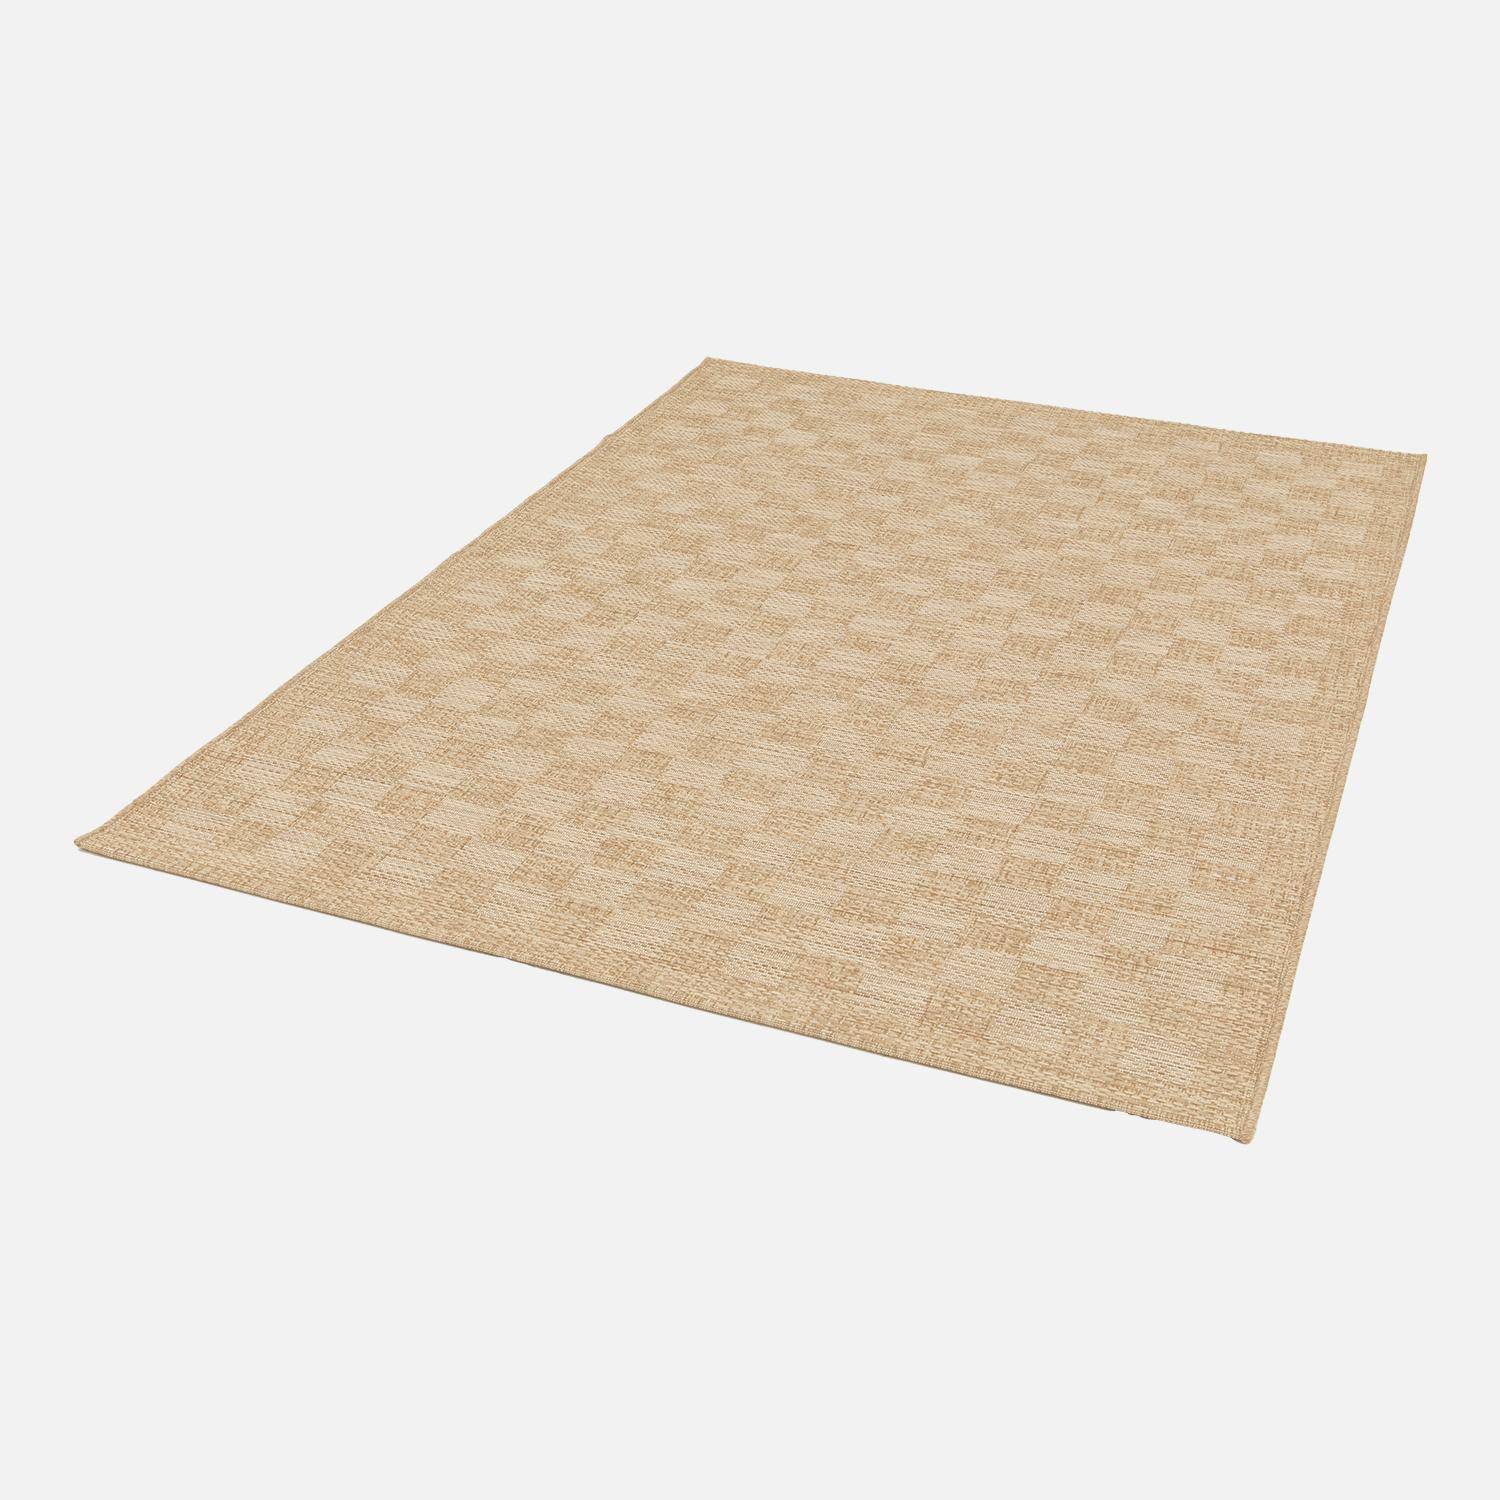 Jute-effect indoor/outdoor carpet with chequered pattern, Carrie, 120 x 170 cm Photo3